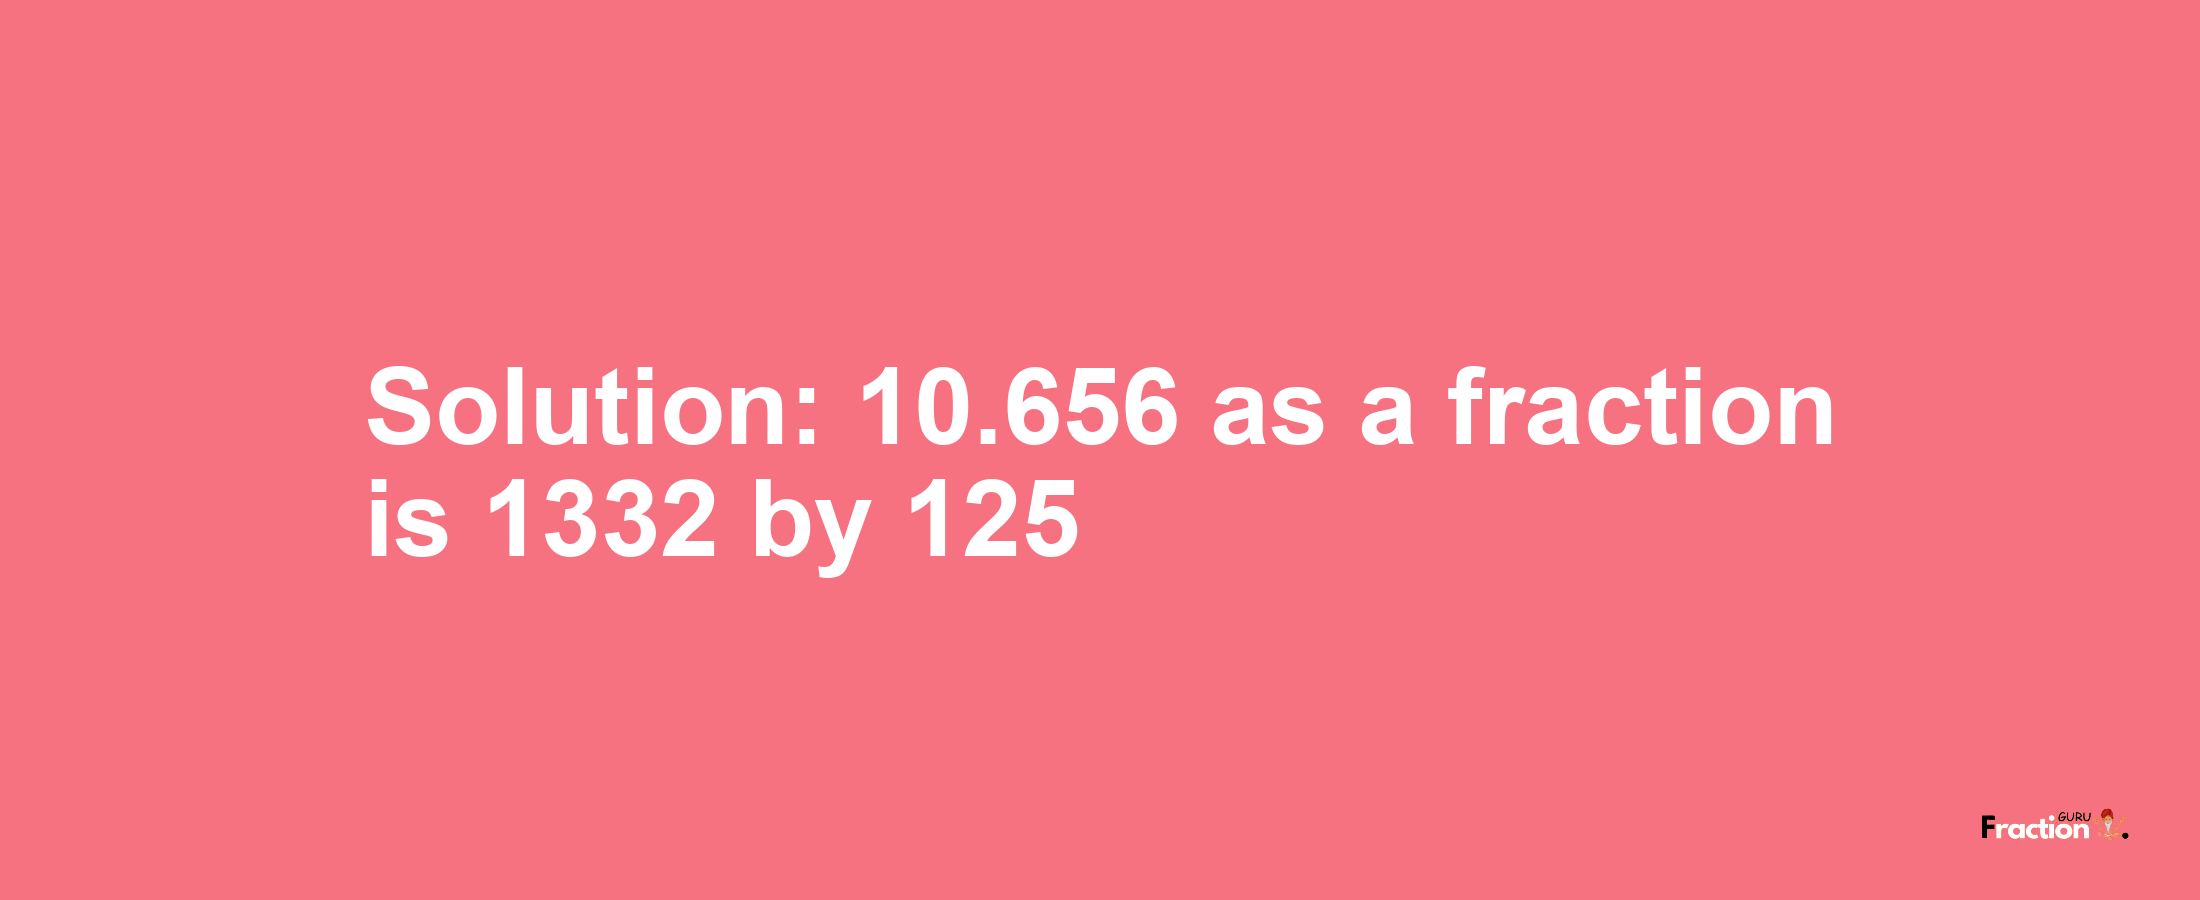 Solution:10.656 as a fraction is 1332/125